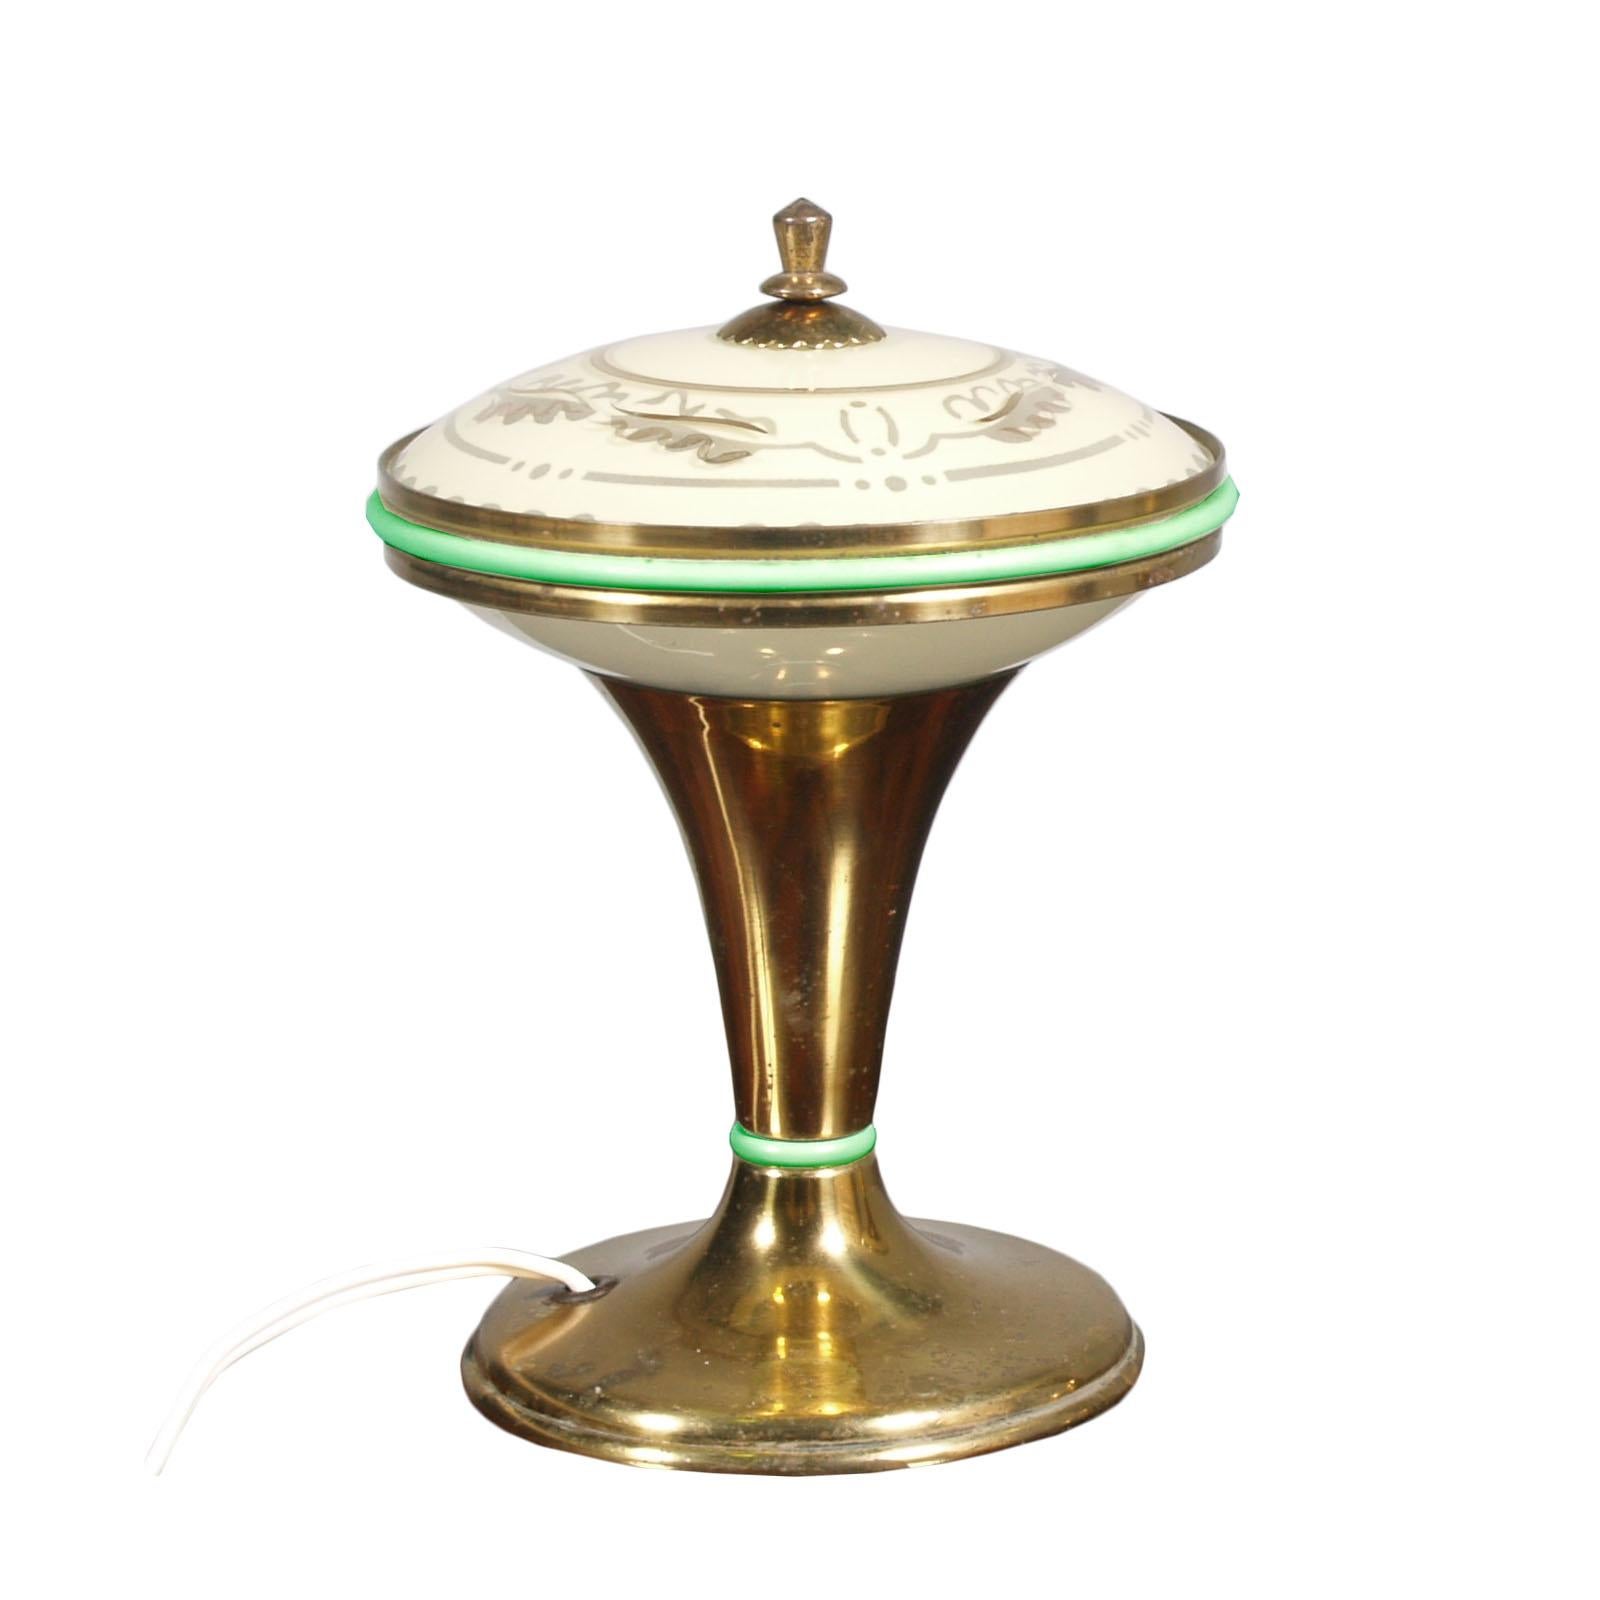 Midcentury Art Deco table lamps in gilt brass and Murano opaline glass the one below, and with gold thread and pastel green enamel the one above.
Overhauled and functioning electrical system.
They can be sold separately
  